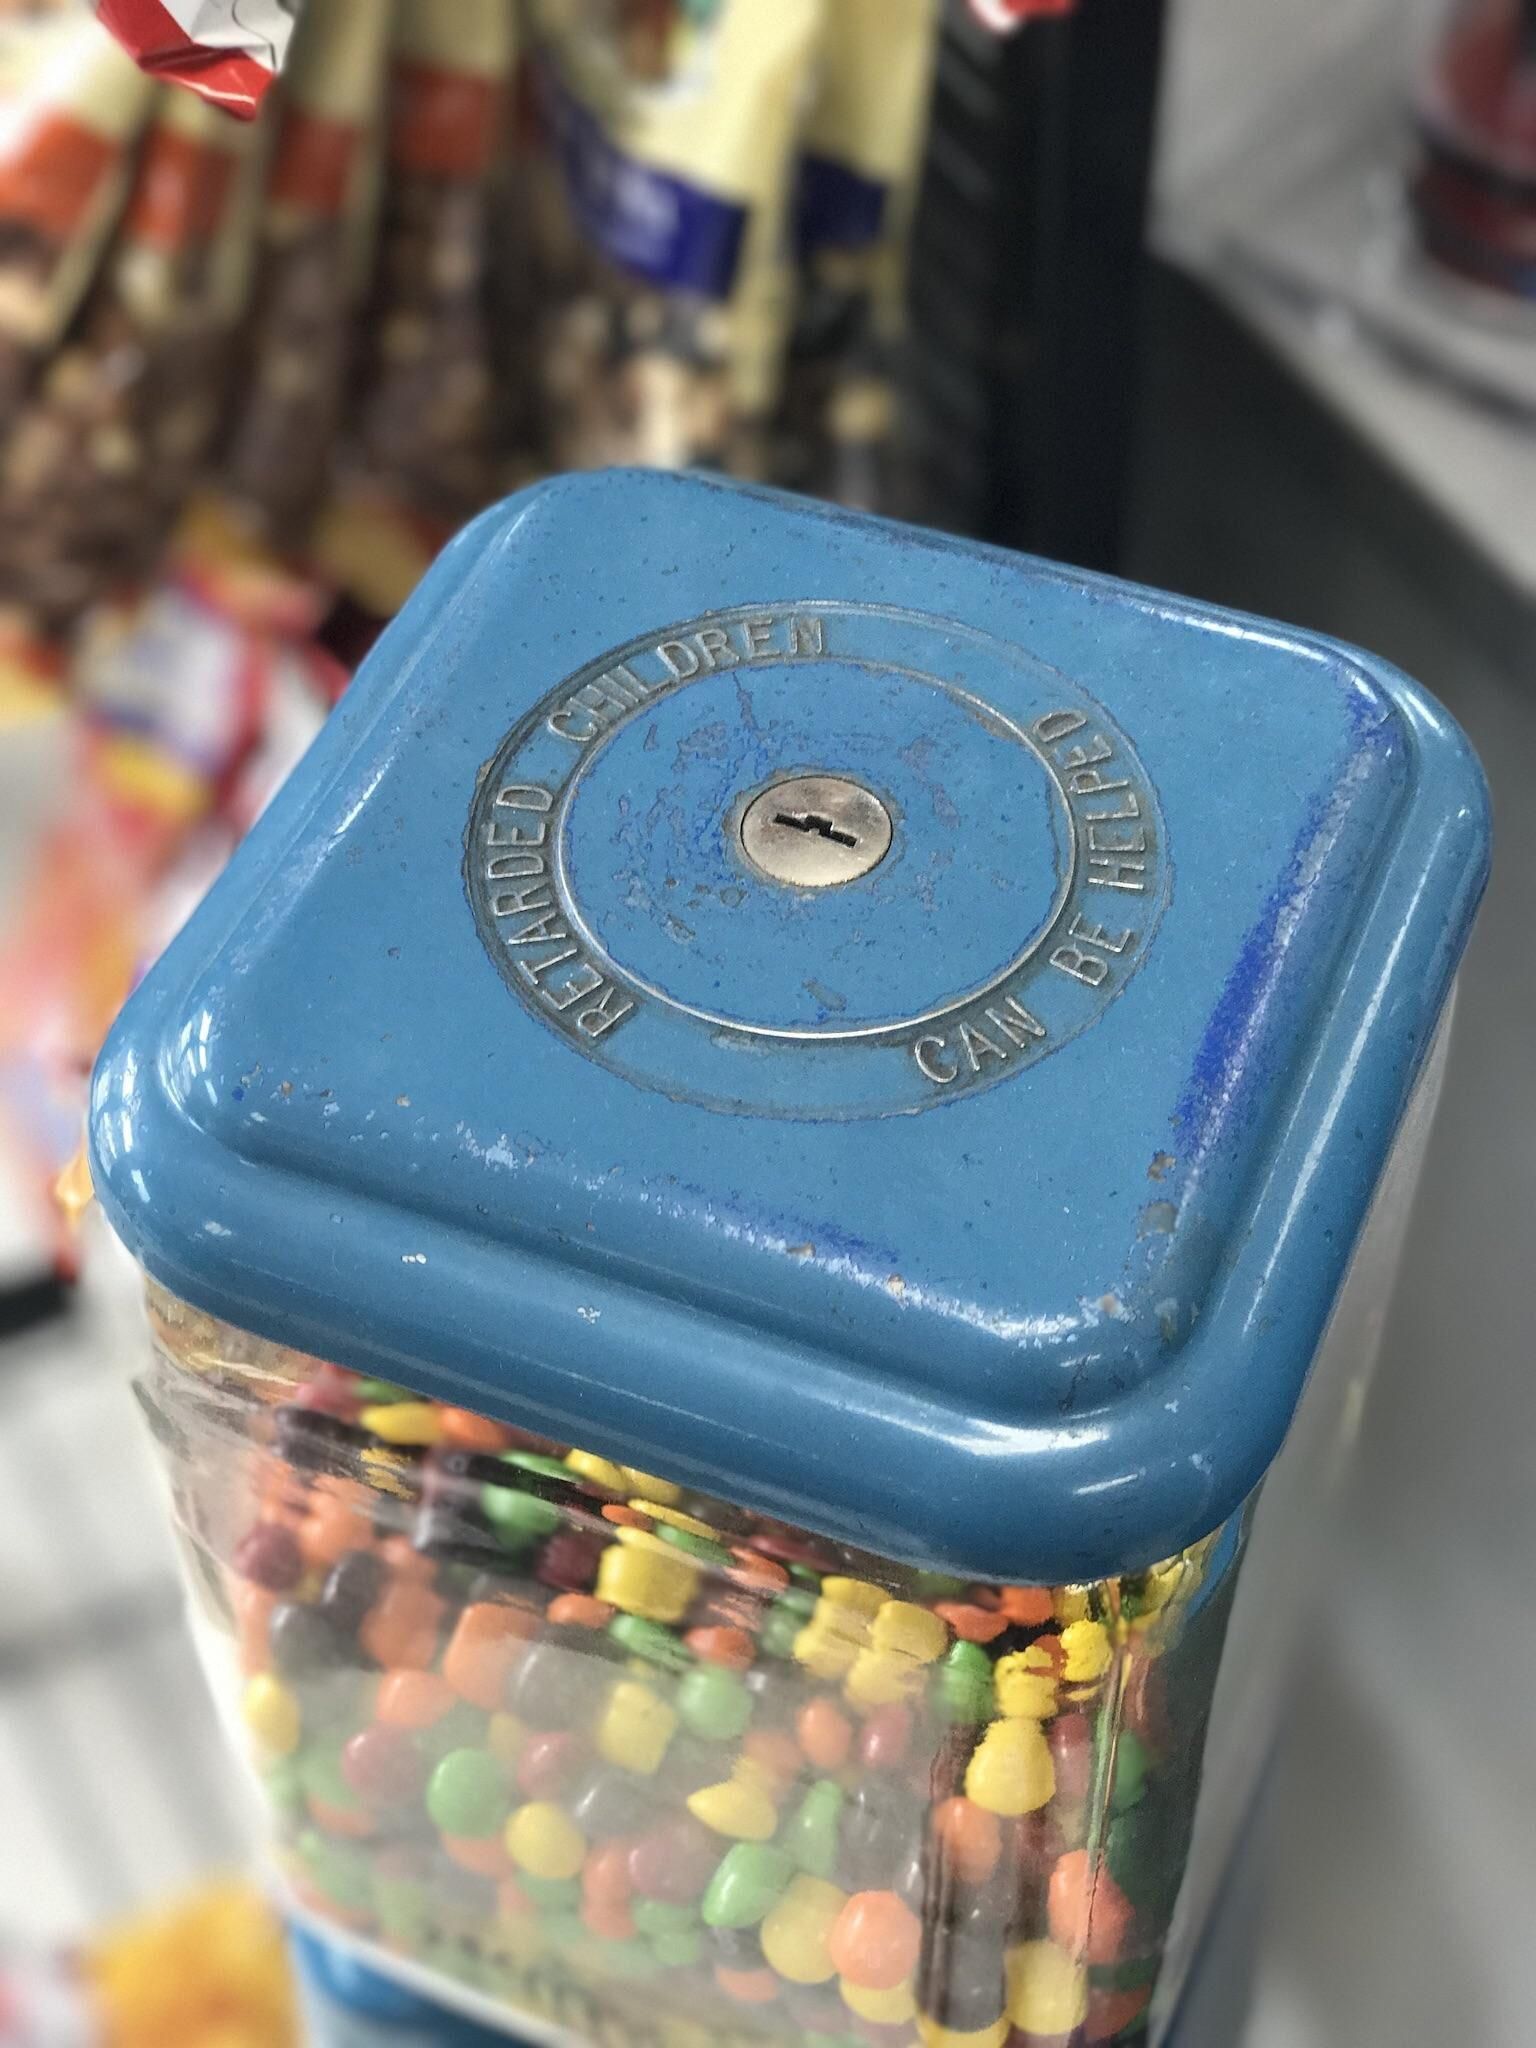 The message on this candy machine is a bit... dated